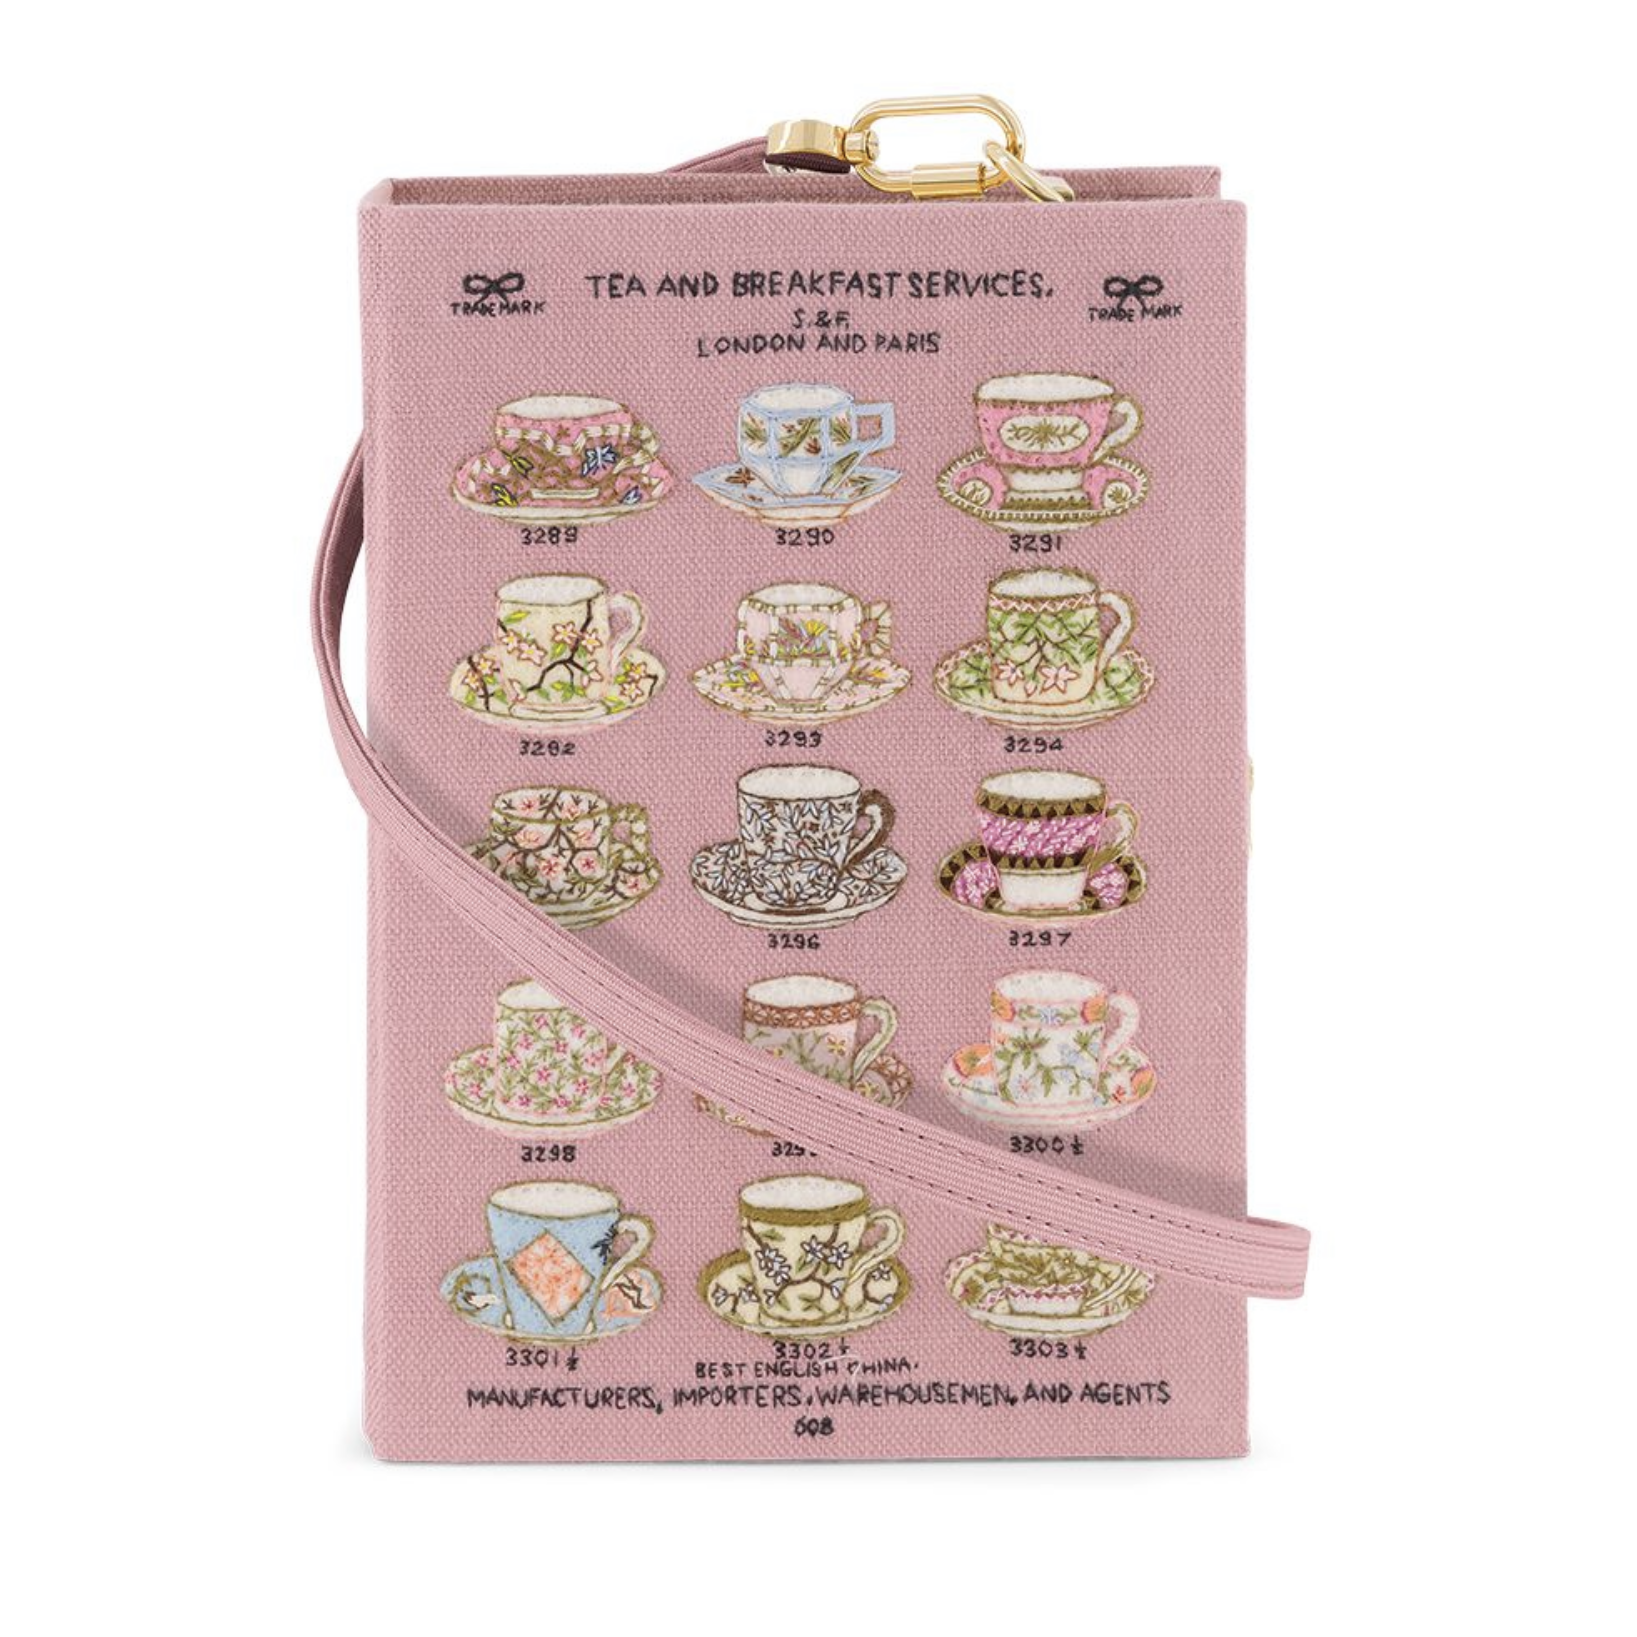 PRE-ORDER Olympia Le-Tan  Victoria and Albert Museum Tea and Breakfast Services BookClutch Strapped